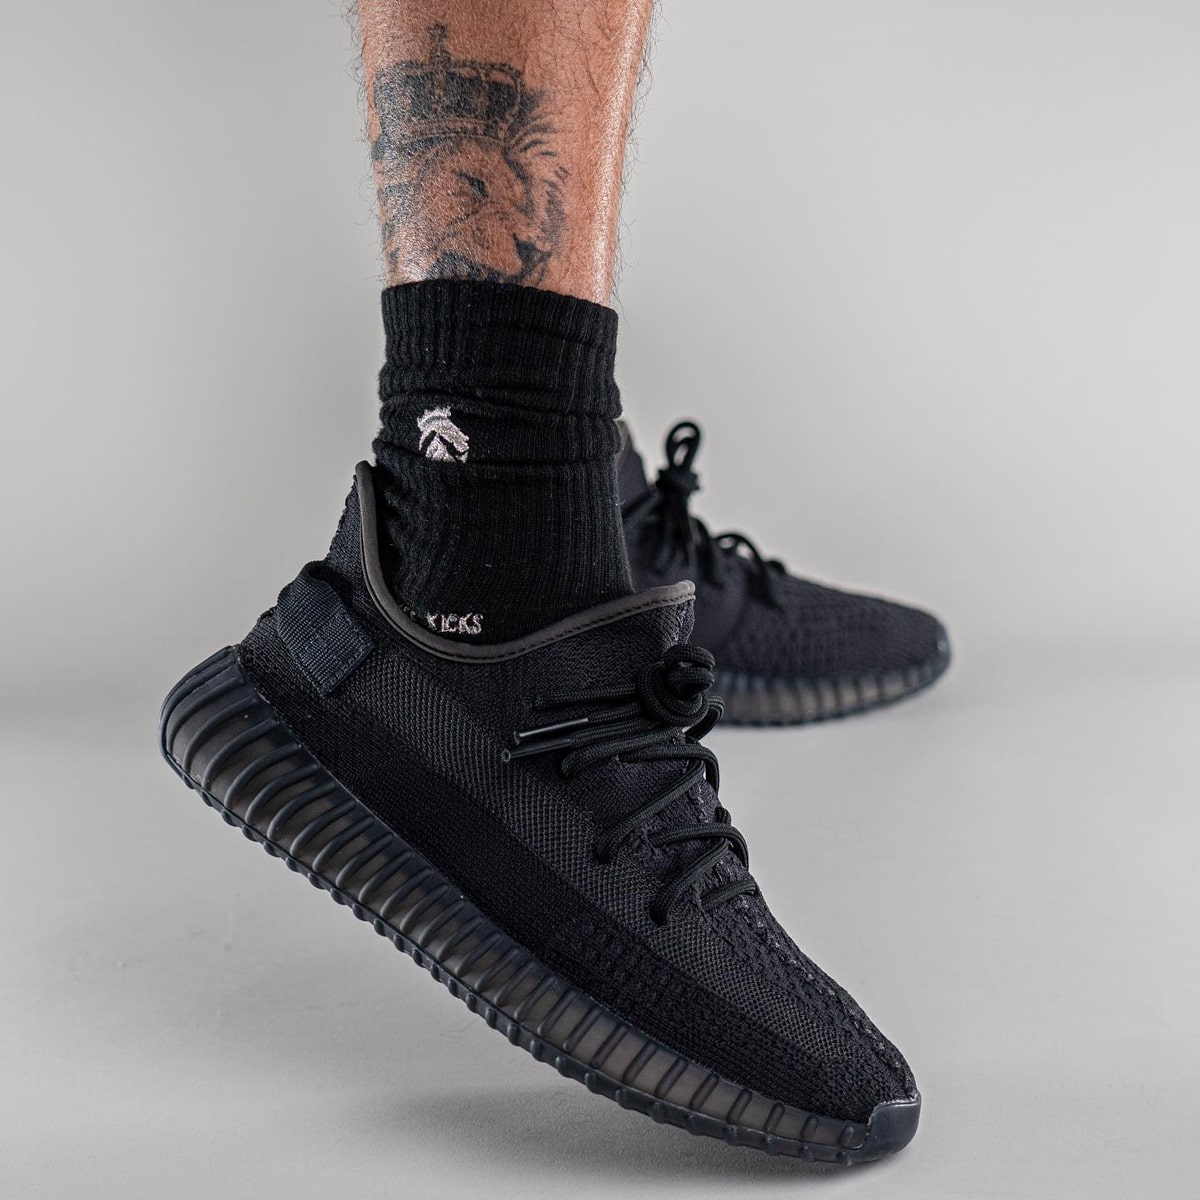 Sequel To govern marketing adidas YEEZY BOOST 350 V2 Onyx HQ4540 Release Date